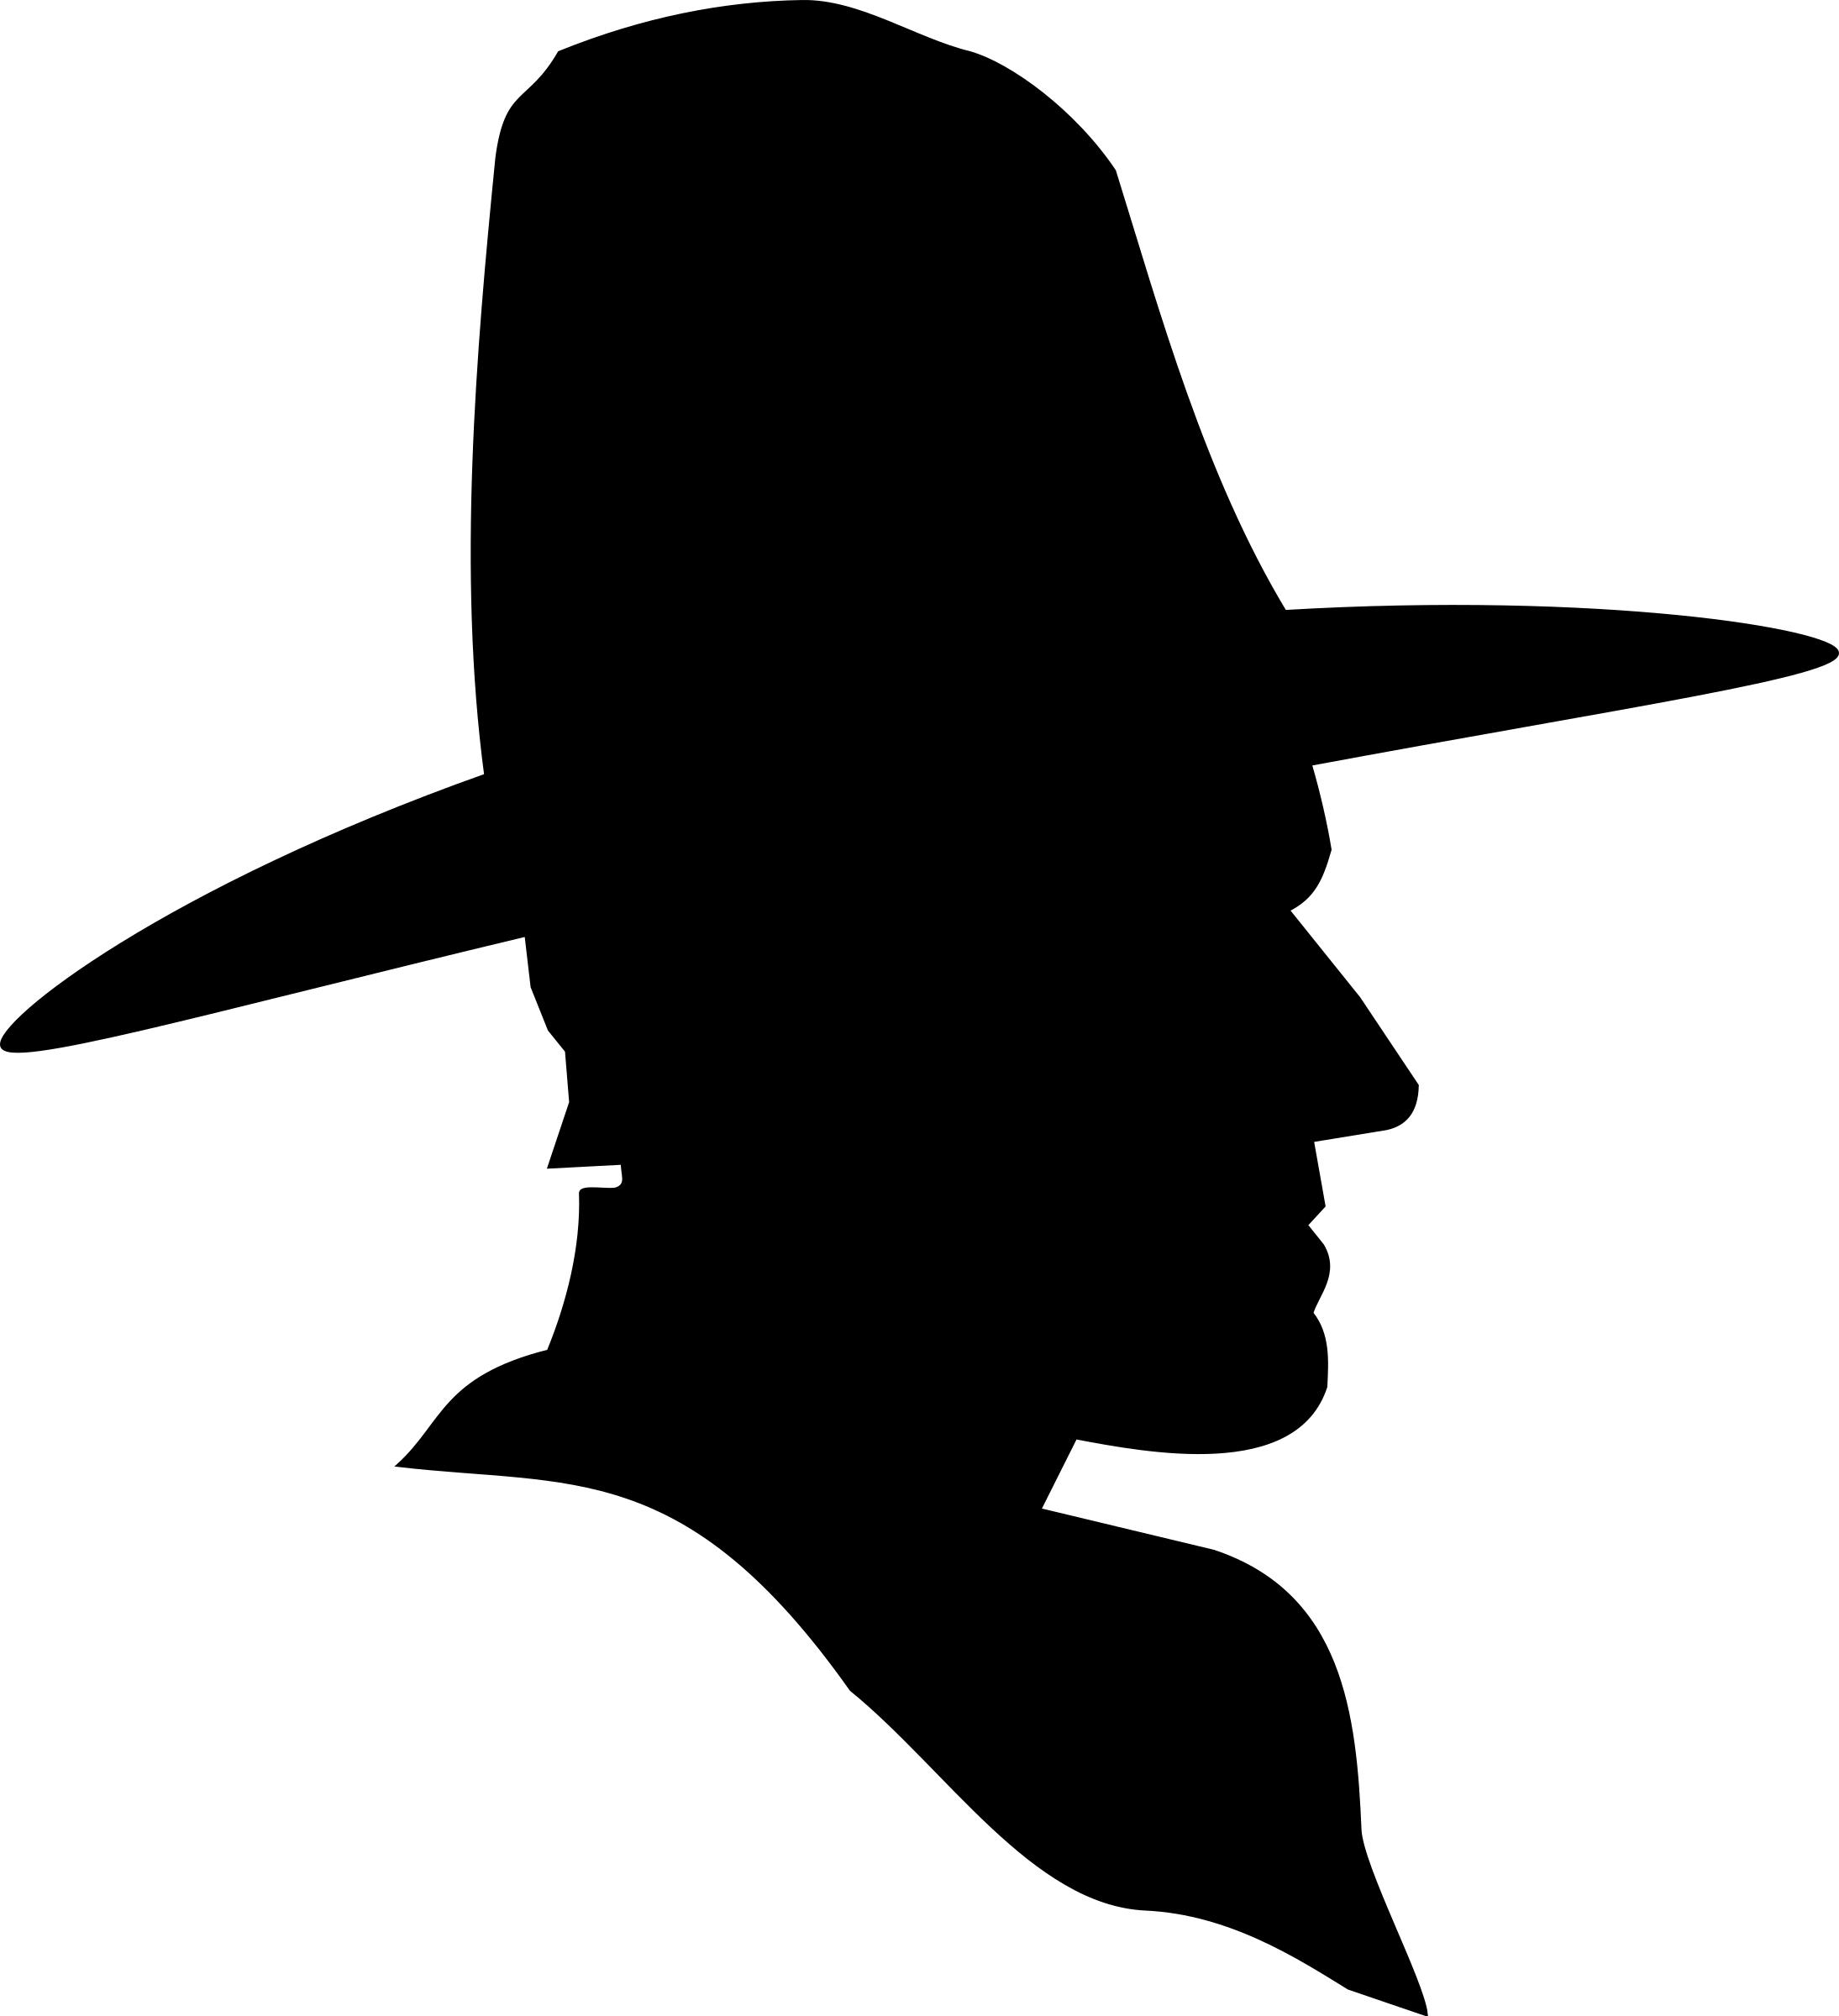 Cowboy Profile Silhouette PNG icons